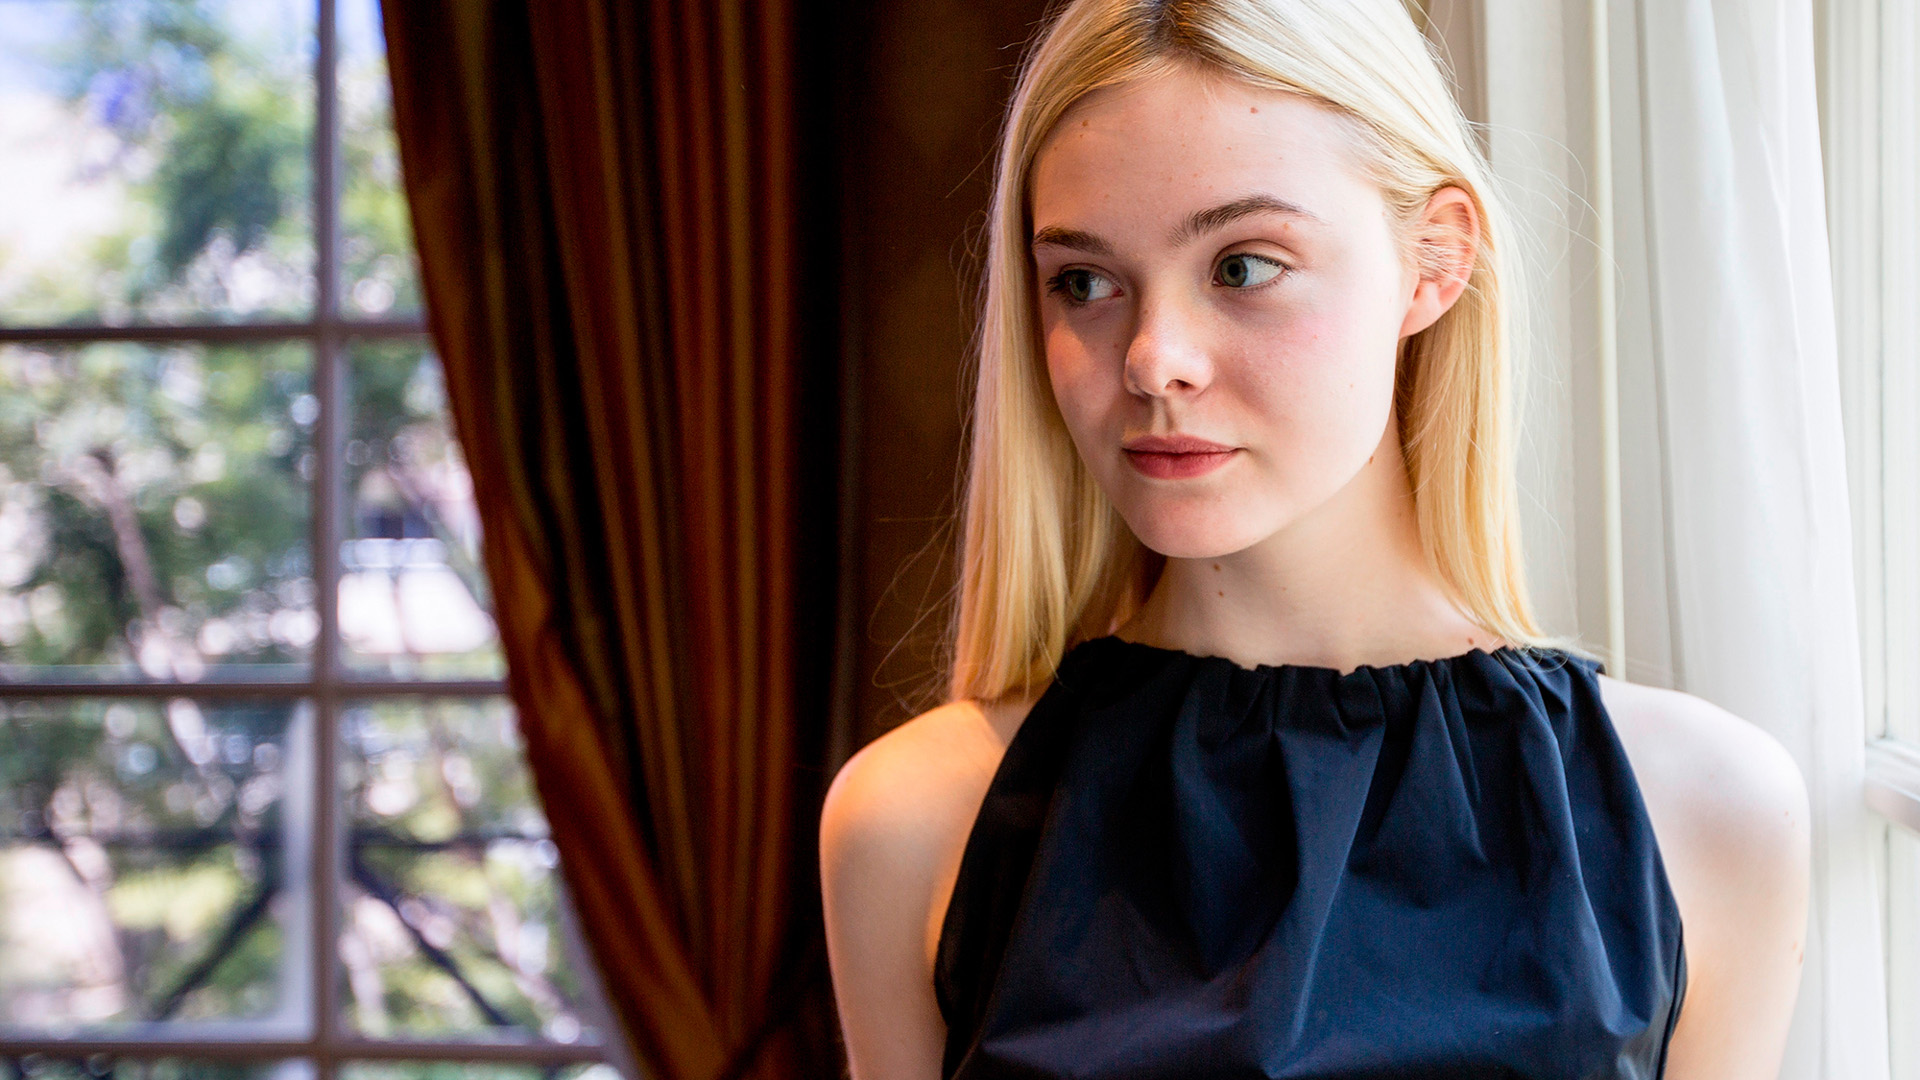 Blue Dress Mary Elle Fanning With Wallpaper Of Window And Screens 2K Mary Elle Fanning